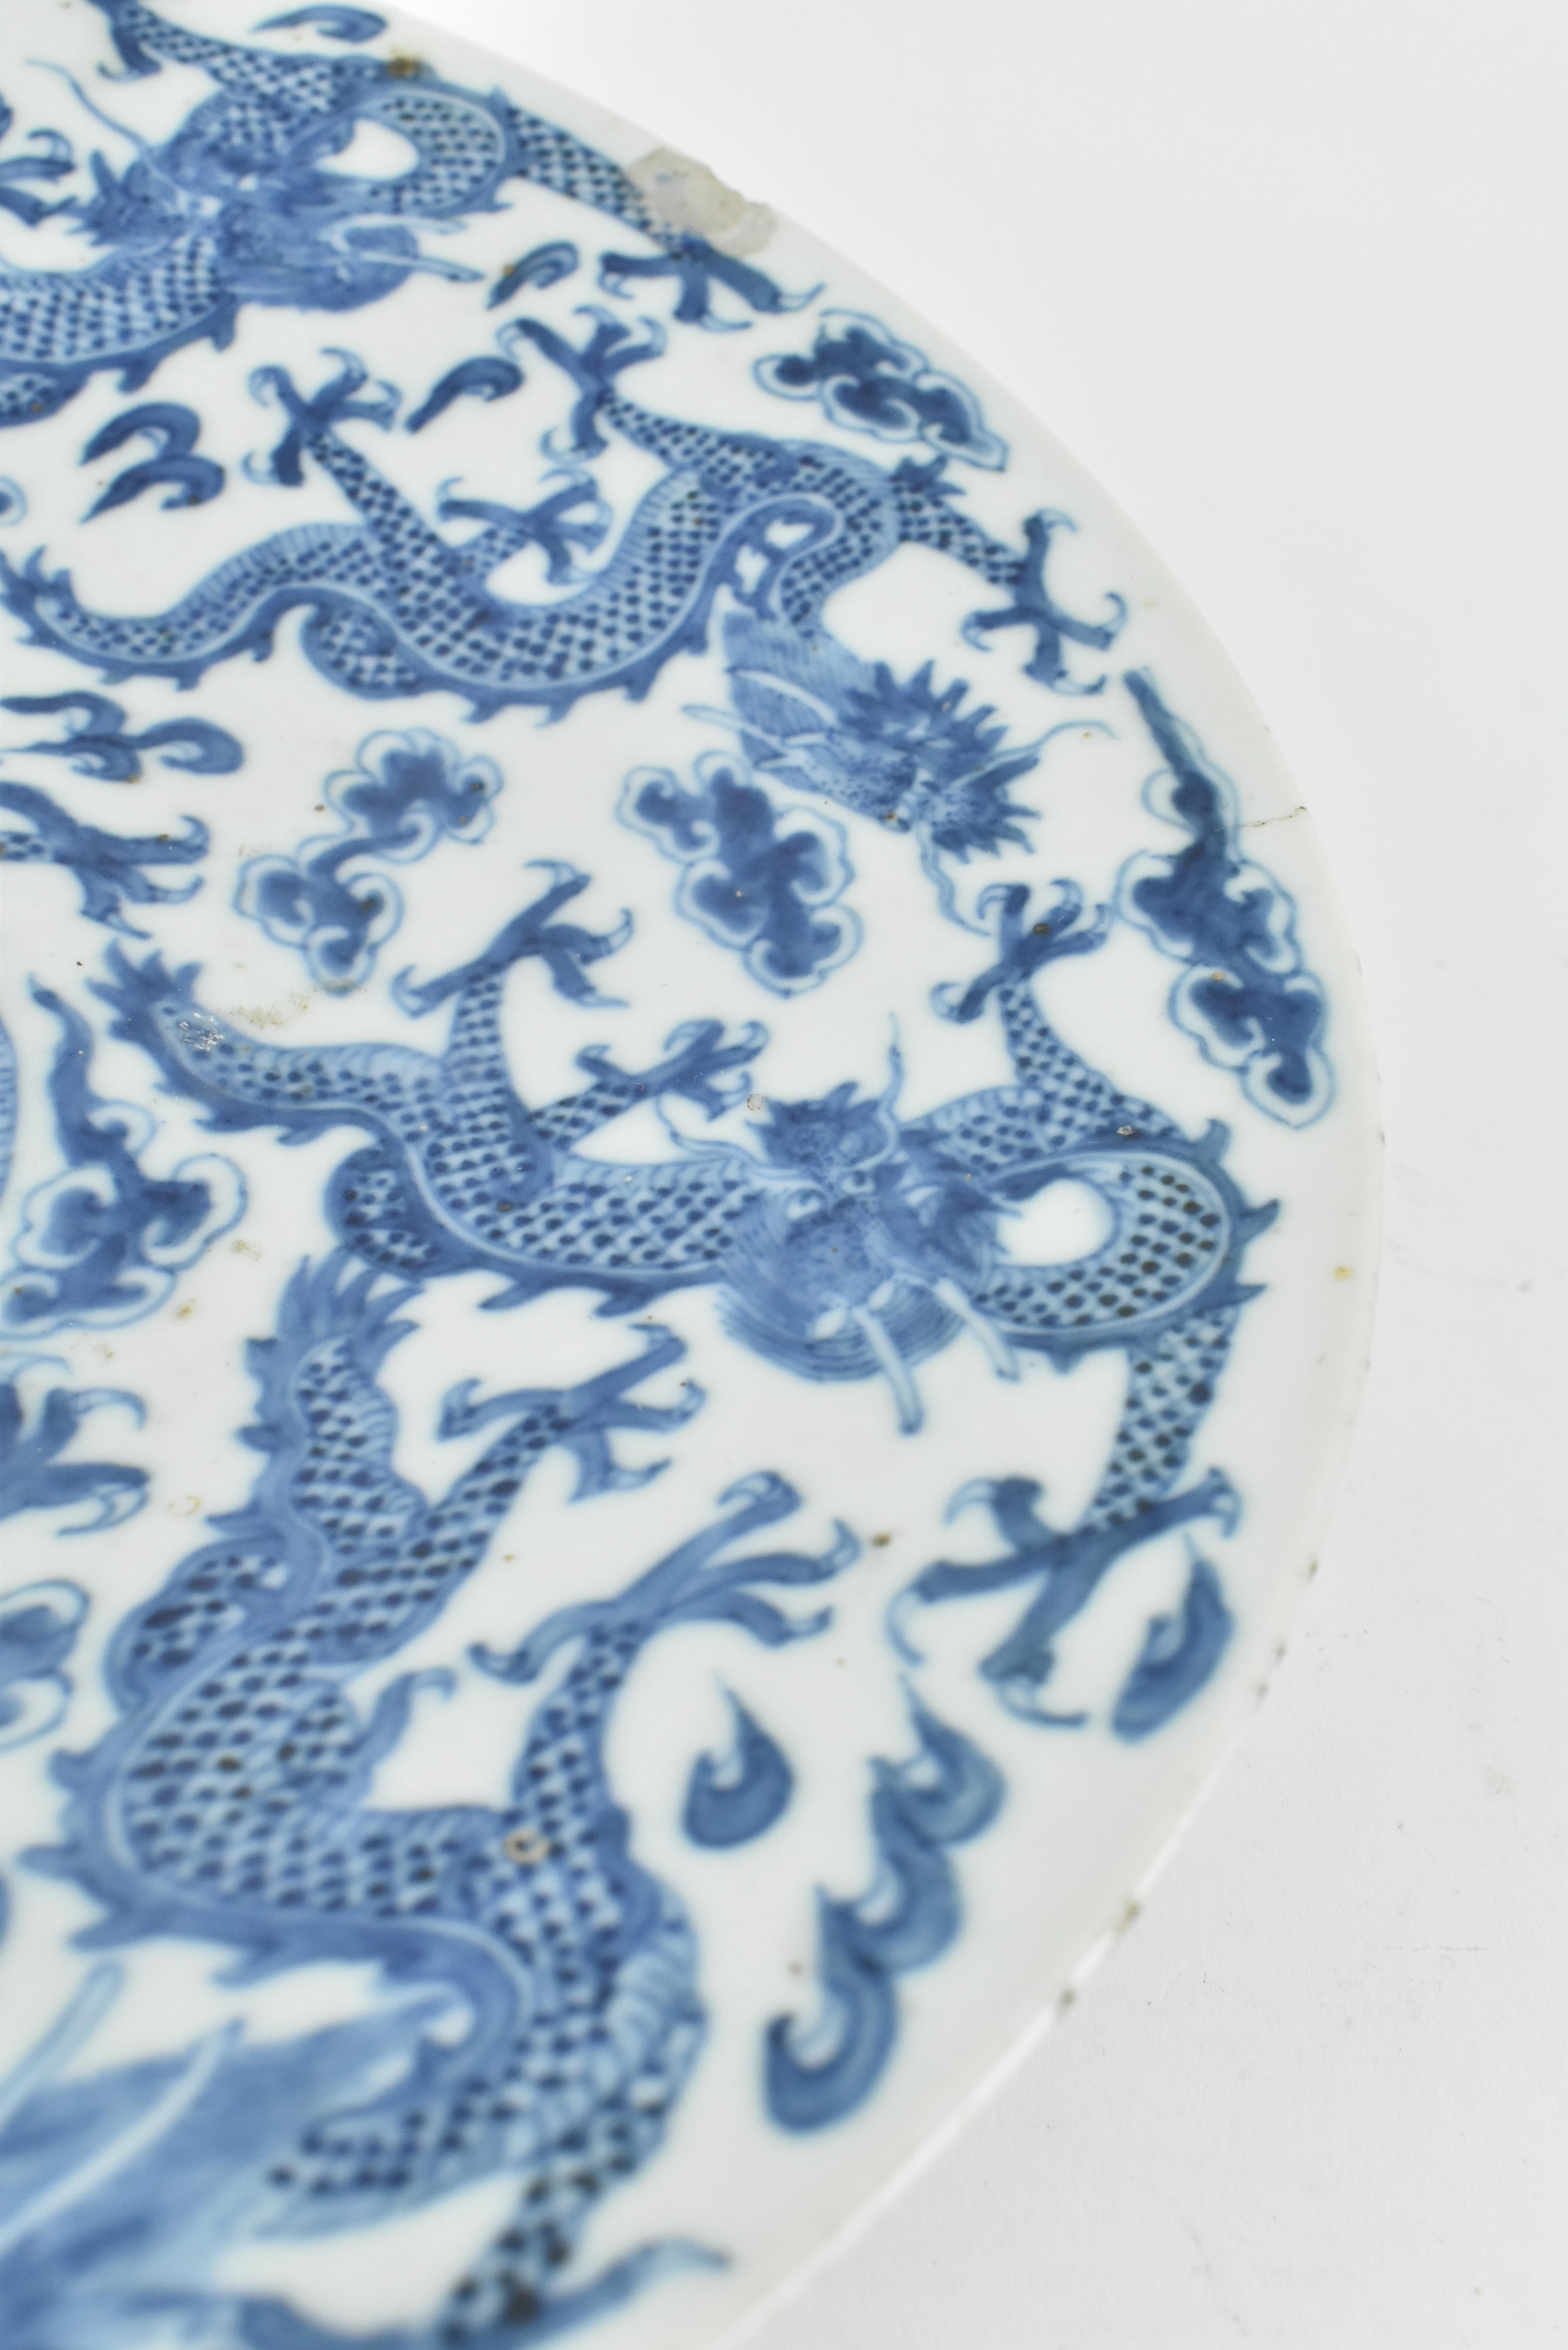 BLUE AND WHITE NINE DRAGON CHARGER, CHENGHUA MARKED - Image 4 of 6